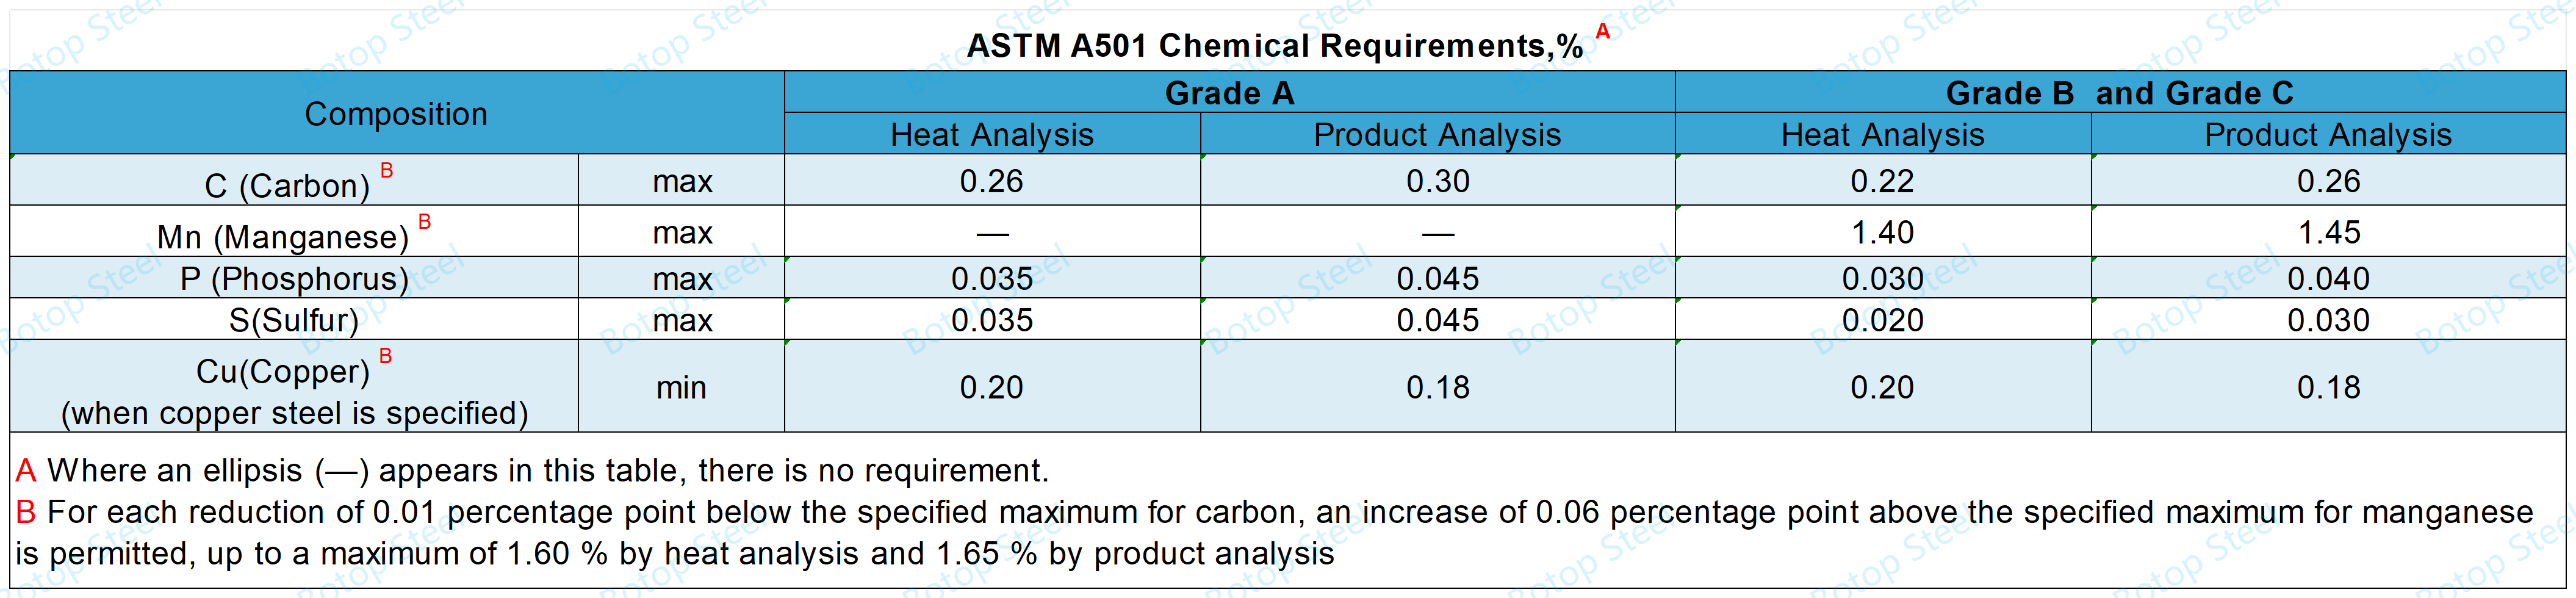 astm a501 Chemical Requirements